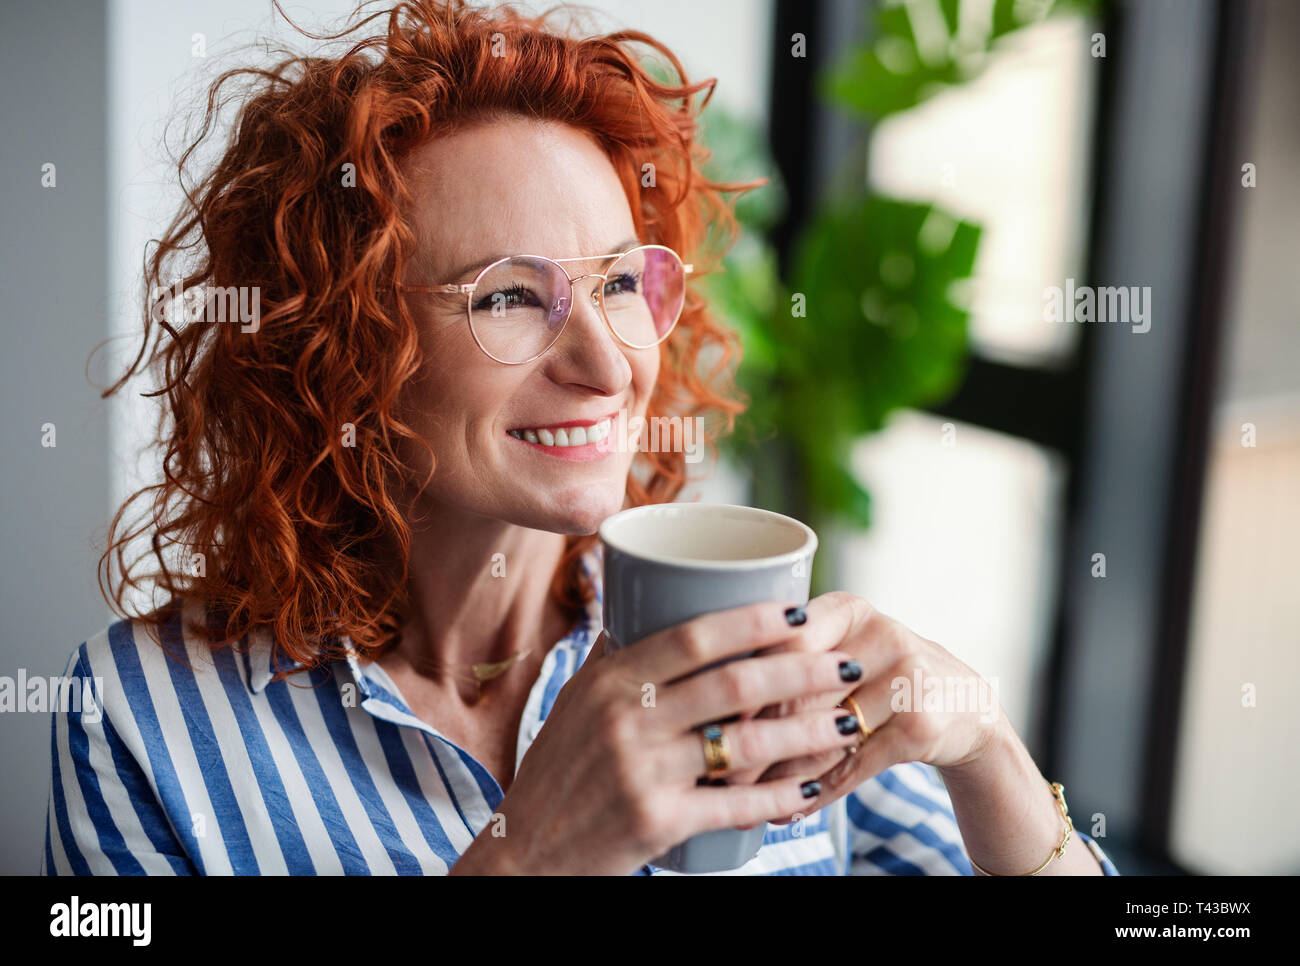 A portrait of businesswoman in an office, holding a cup of coffee. Stock Photo